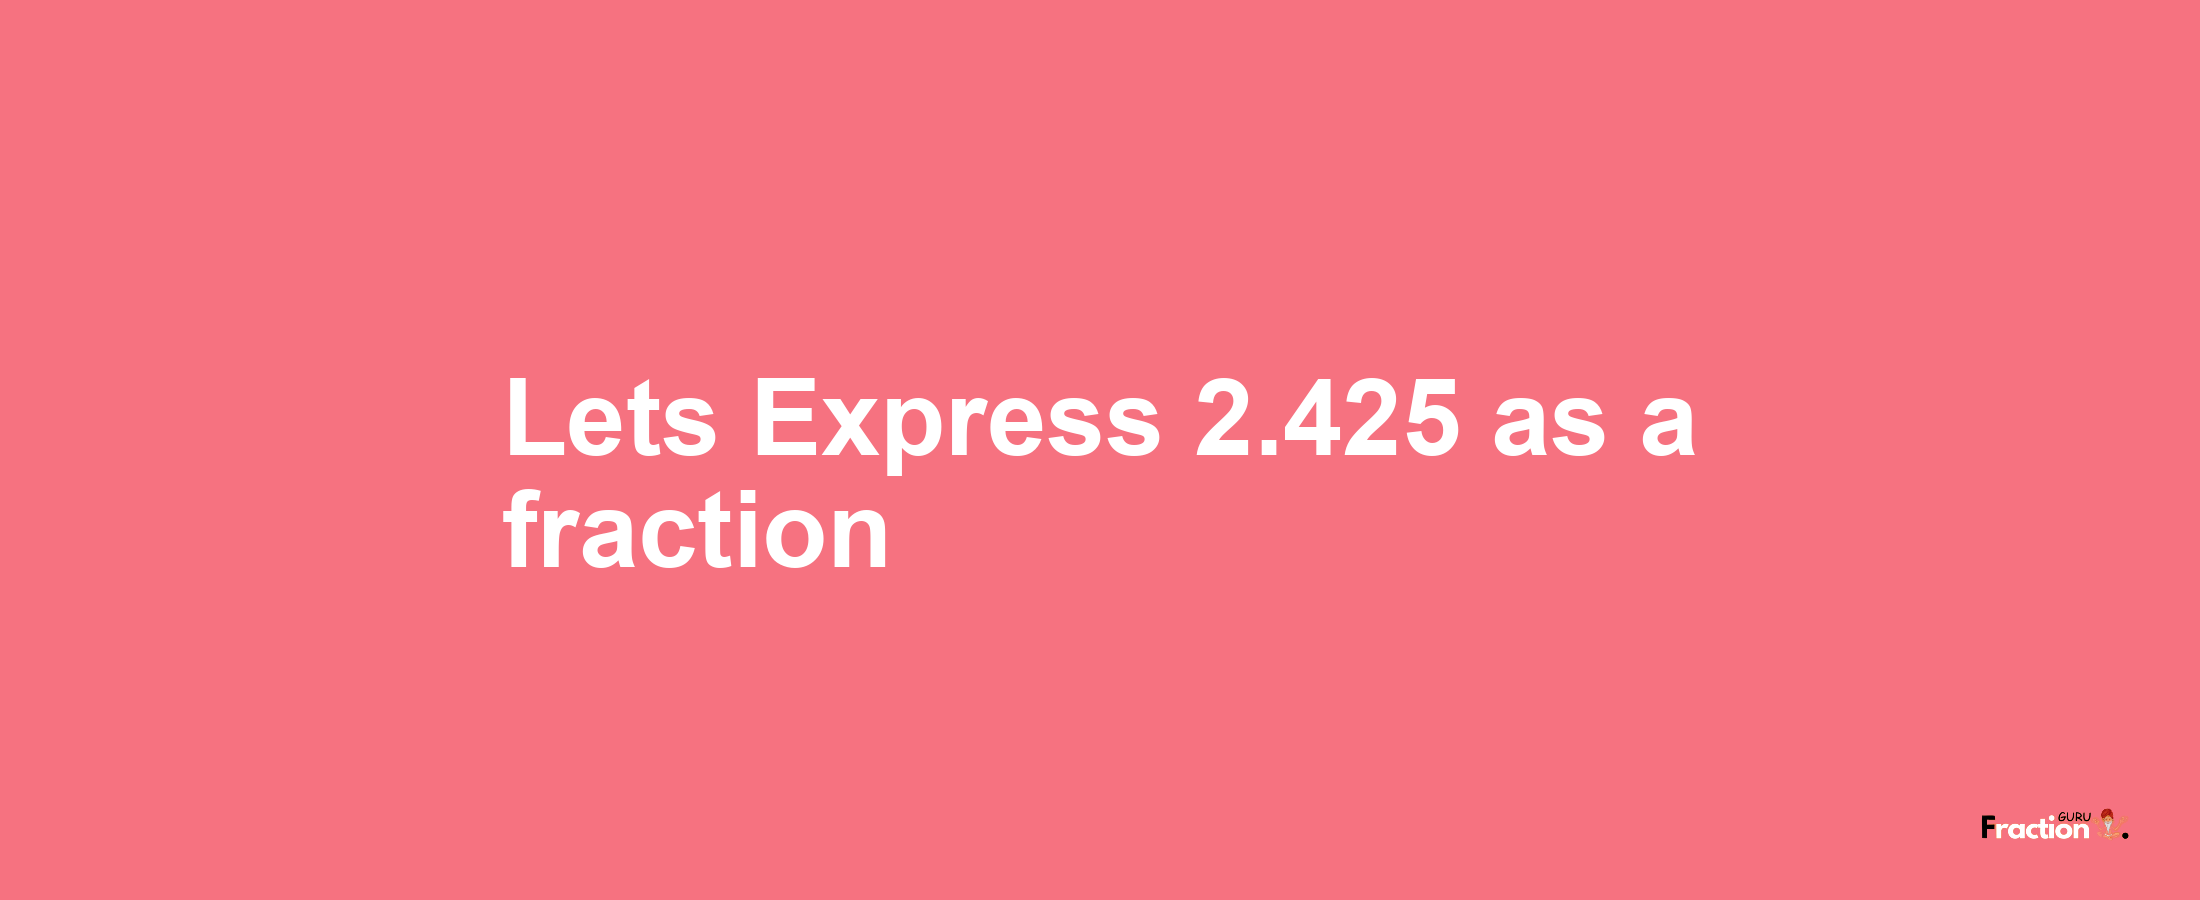 Lets Express 2.425 as afraction